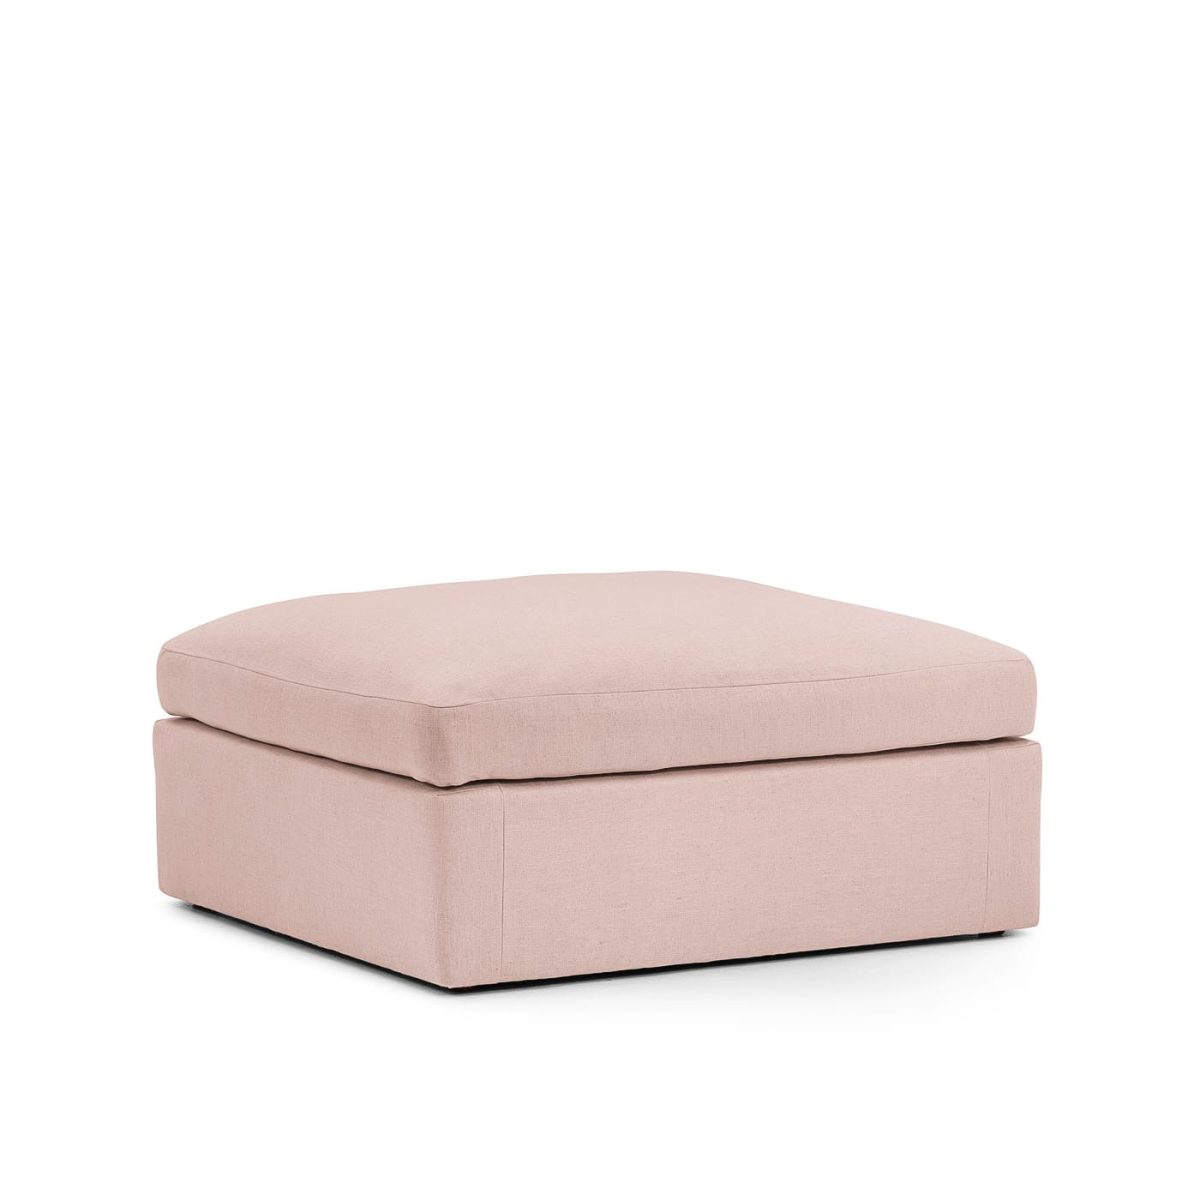 Lucie Grande 3-seater sofa (with footstool) Blush